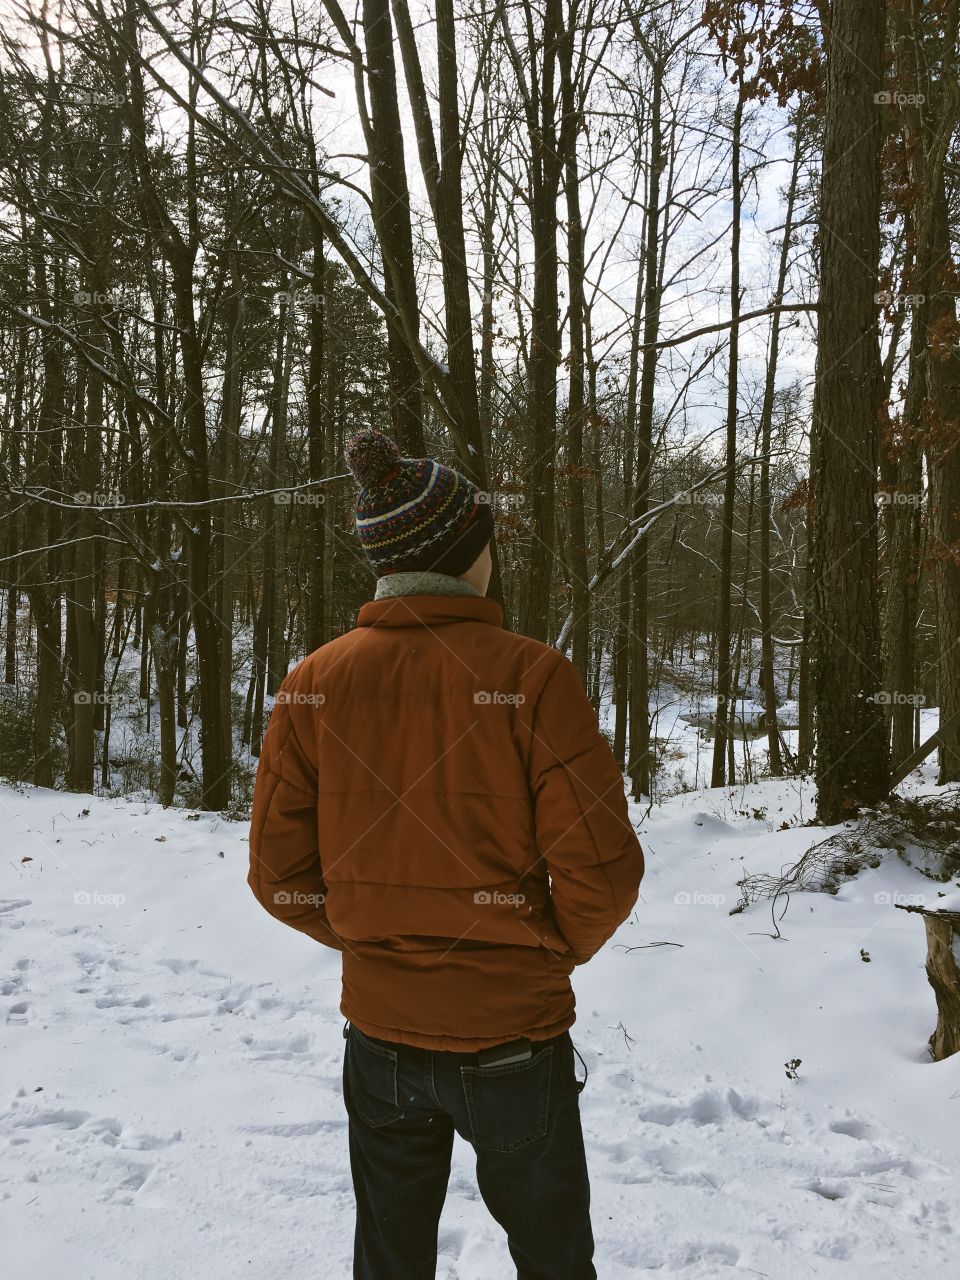 A rear view of person standing in snow